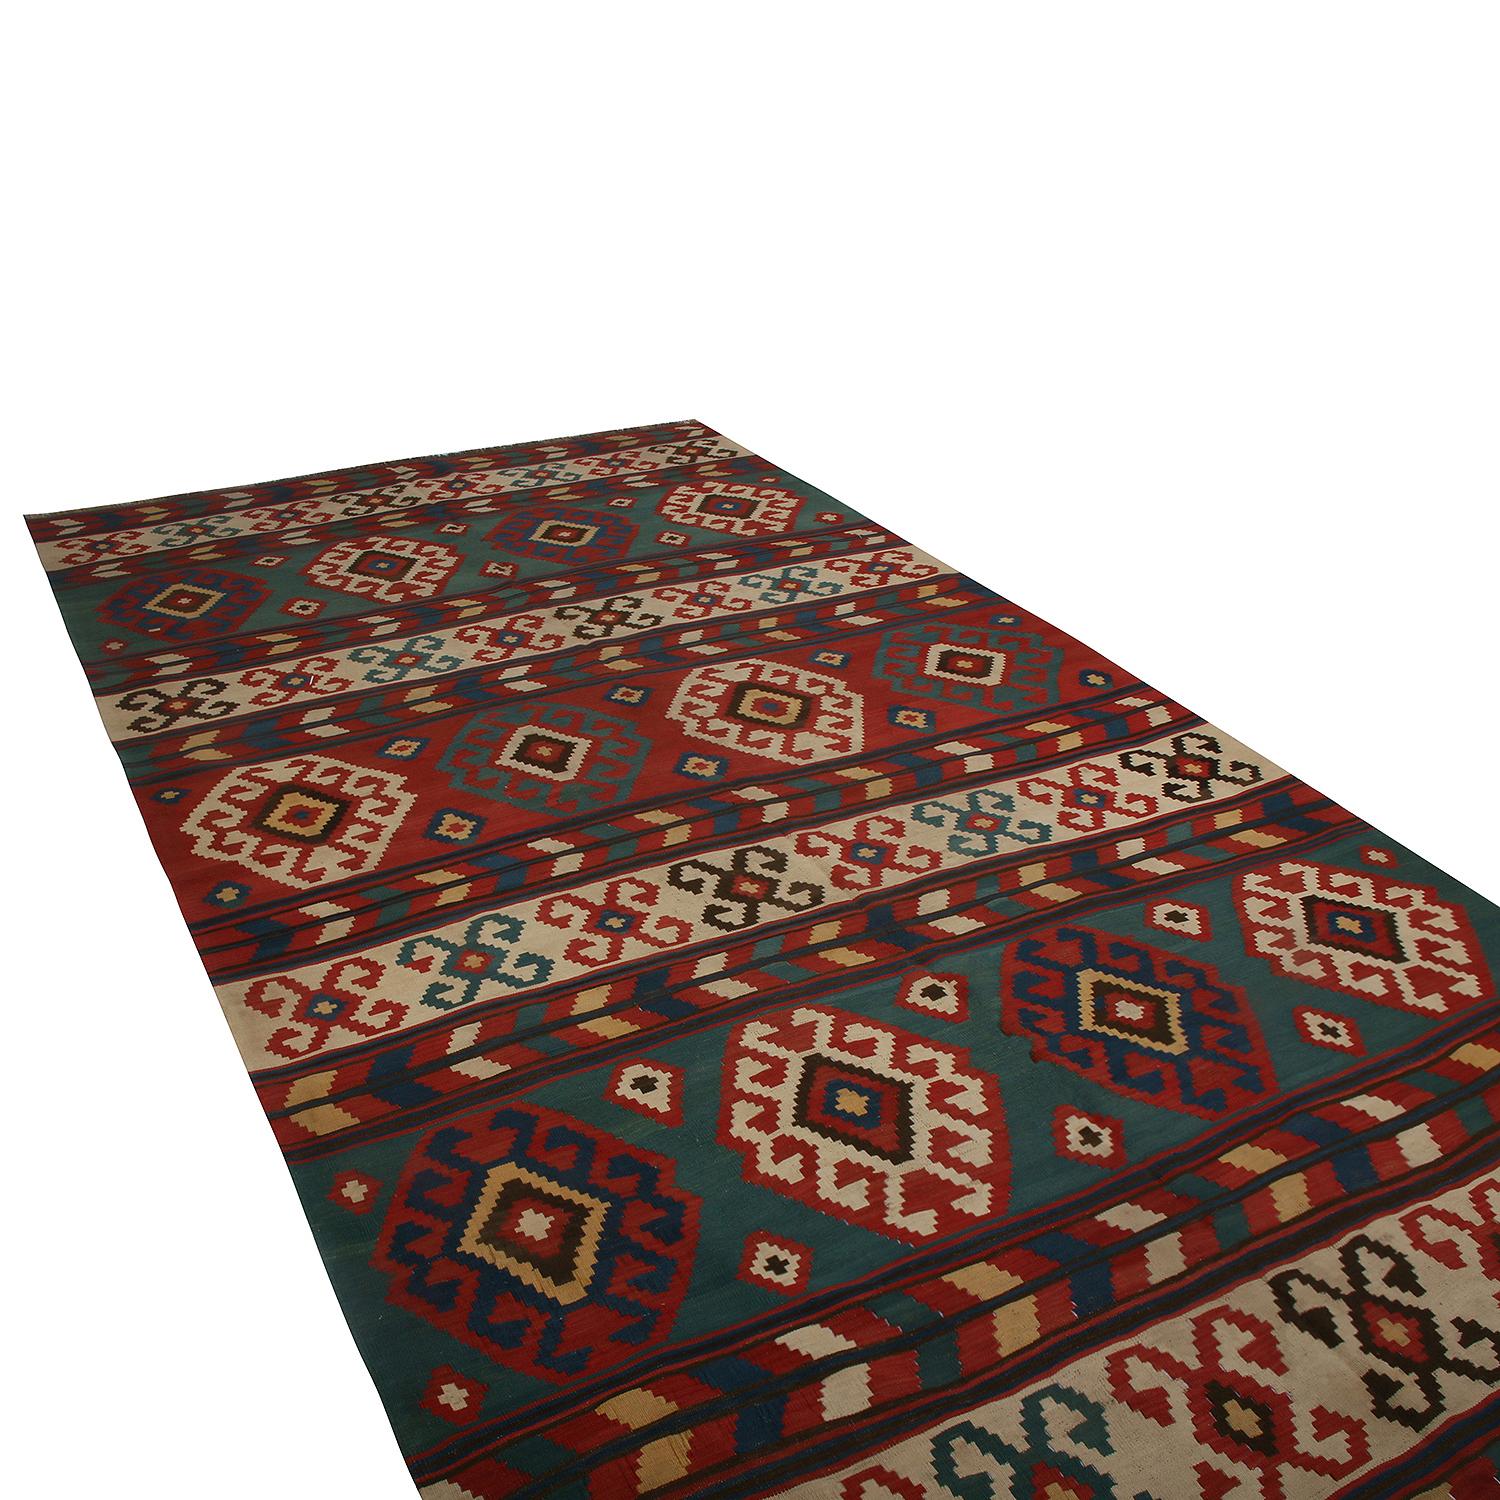 Hand knotted in Turkey originating between 1950-1960, this vintage midcentury 6 x 11 wool Kilim enjoys a design reminiscent of many patterns from neighboring Azerbaijan, enjoying rarity and distinction in its traditional and whimsical colors with